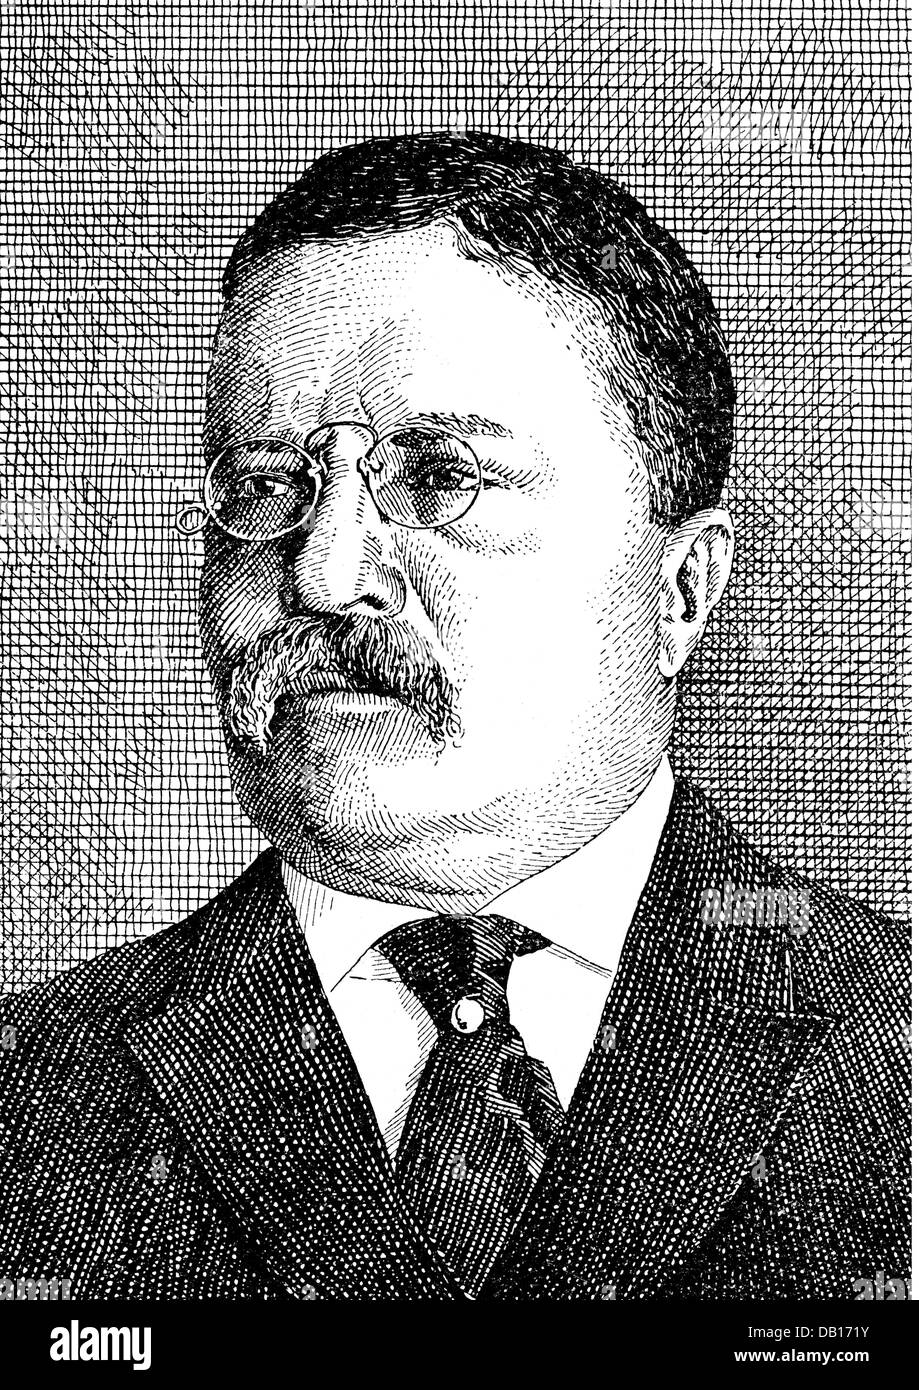 Roosevelt, Theodore 'Teddy', 27.10.1858 - 6.1.1919, American politician (Rep.), 26. Präsident der USA 14.9.1901 - 4.3.1909, portrait, wood engraving by George Paulin, 1920s, Stock Photo